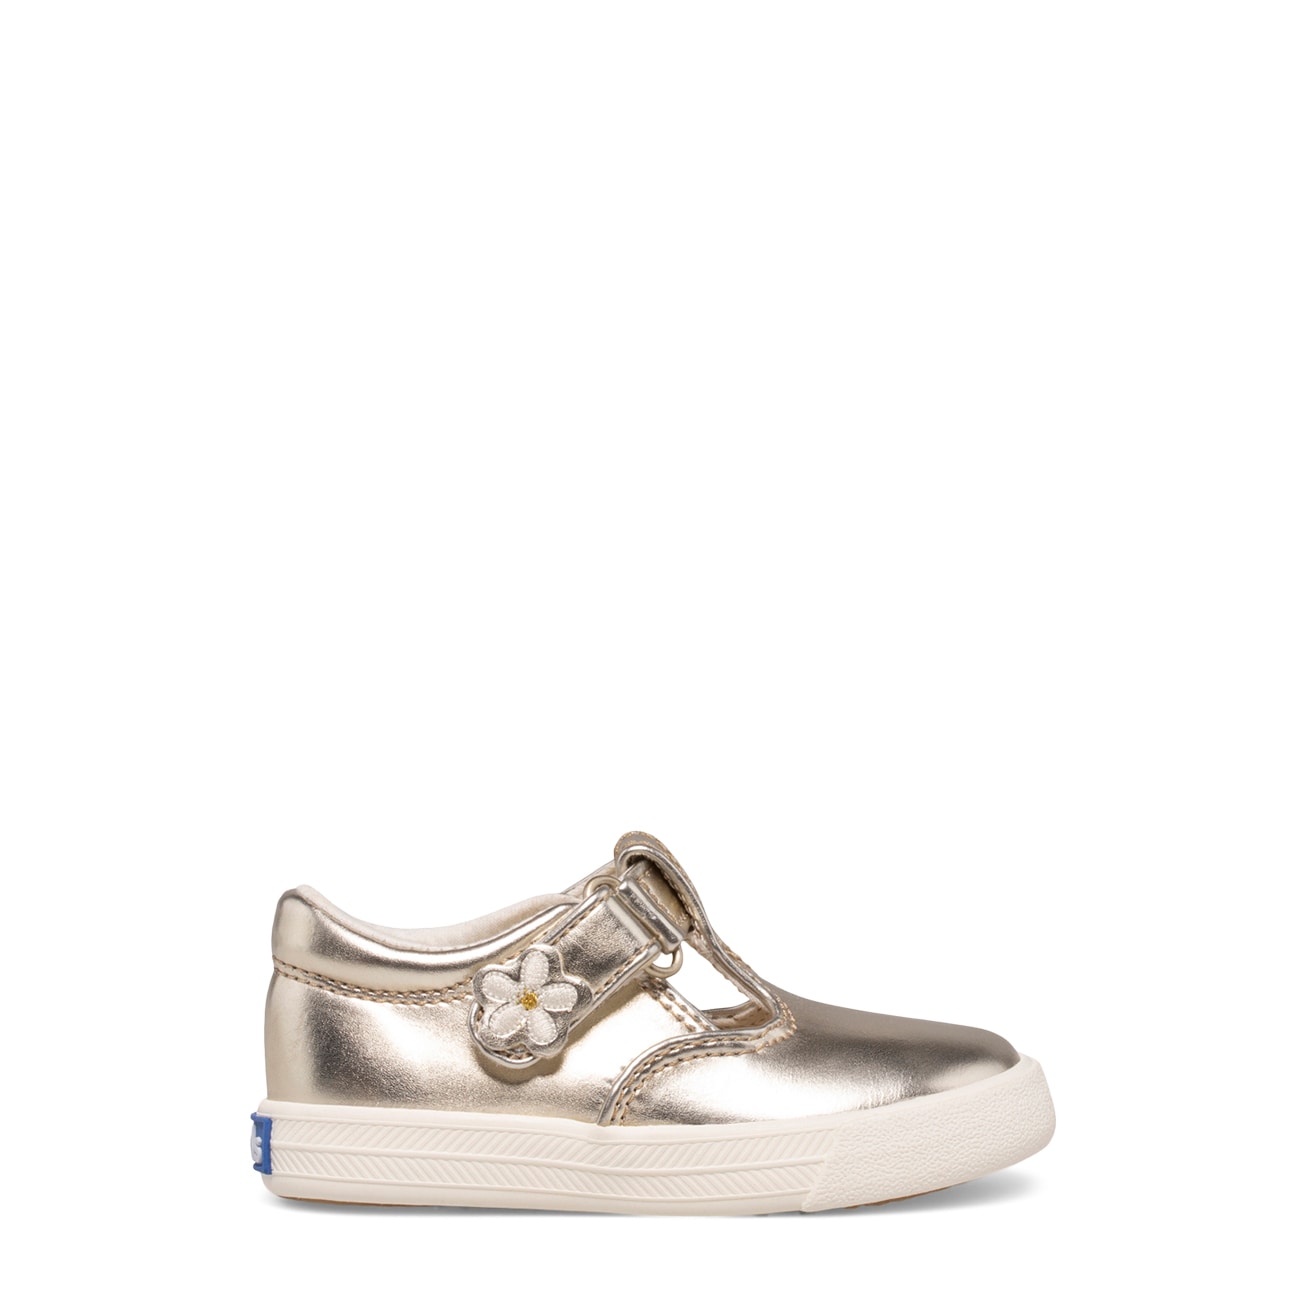 Keds Toddler Girls' Daphne Sneaker | The Shoe Company